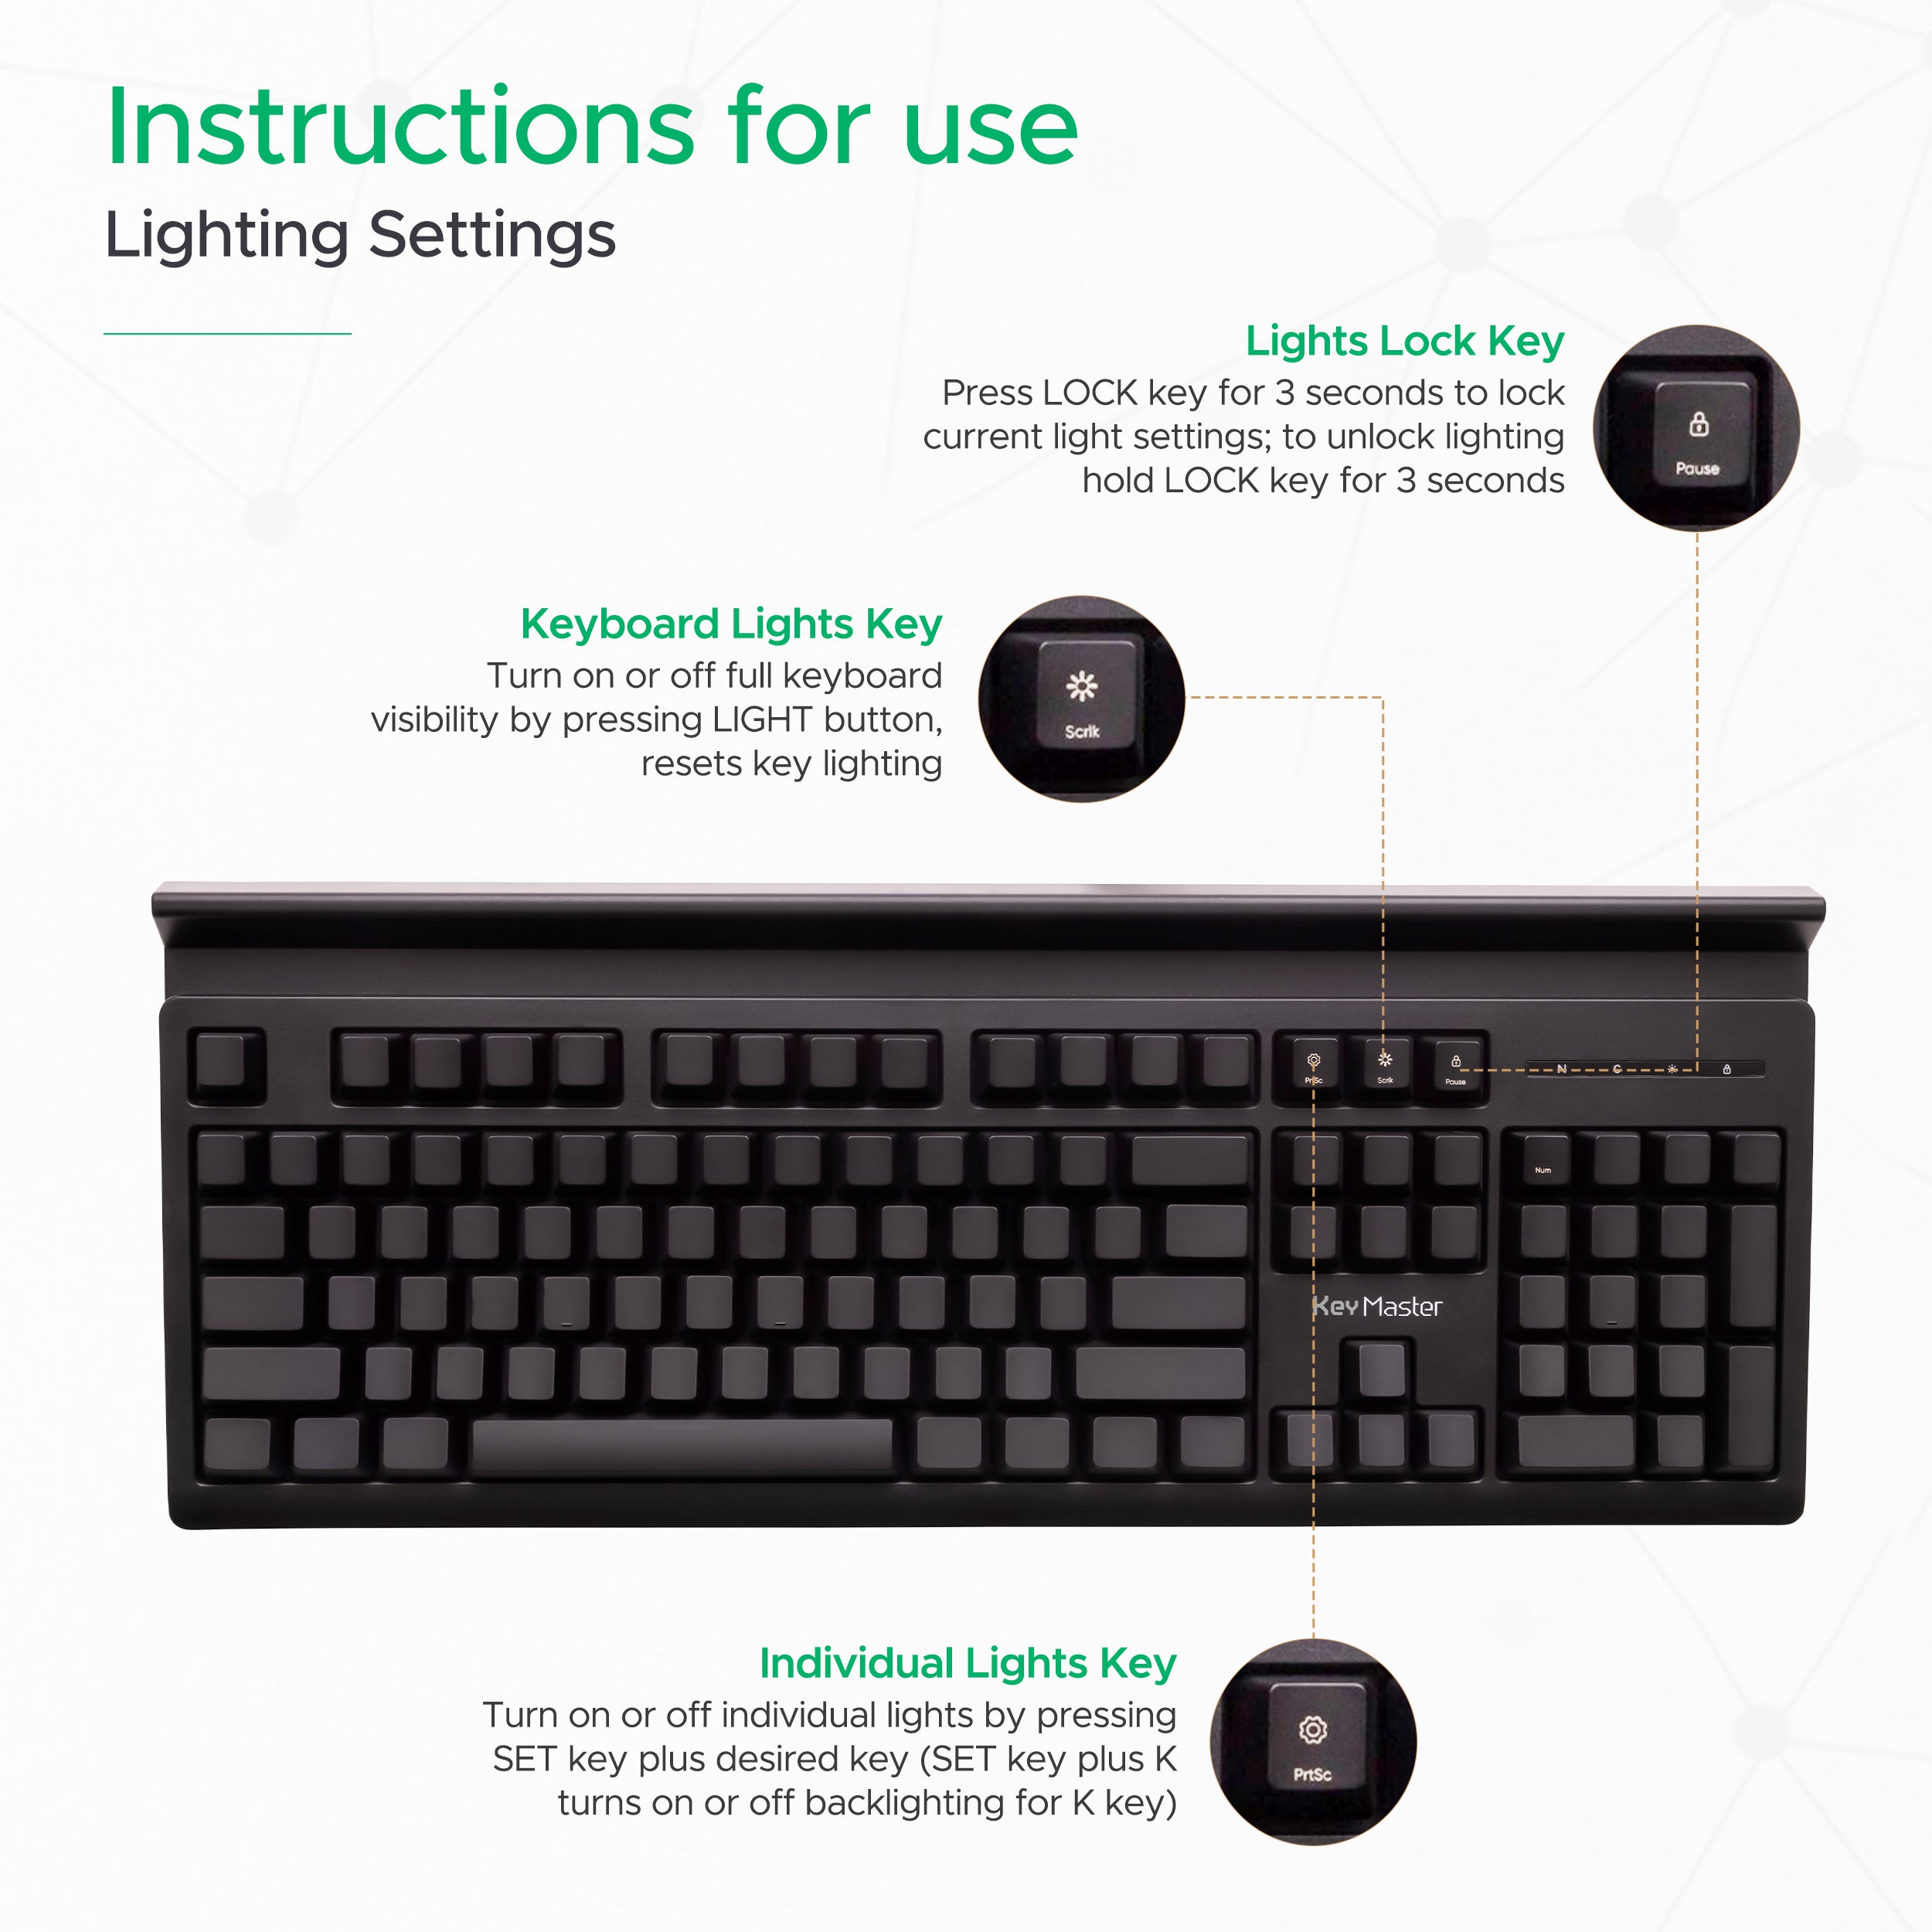 KeyMaster Learning Lights Keyboard Hides Key Visibility as Students Learn Touch-Type Mastery